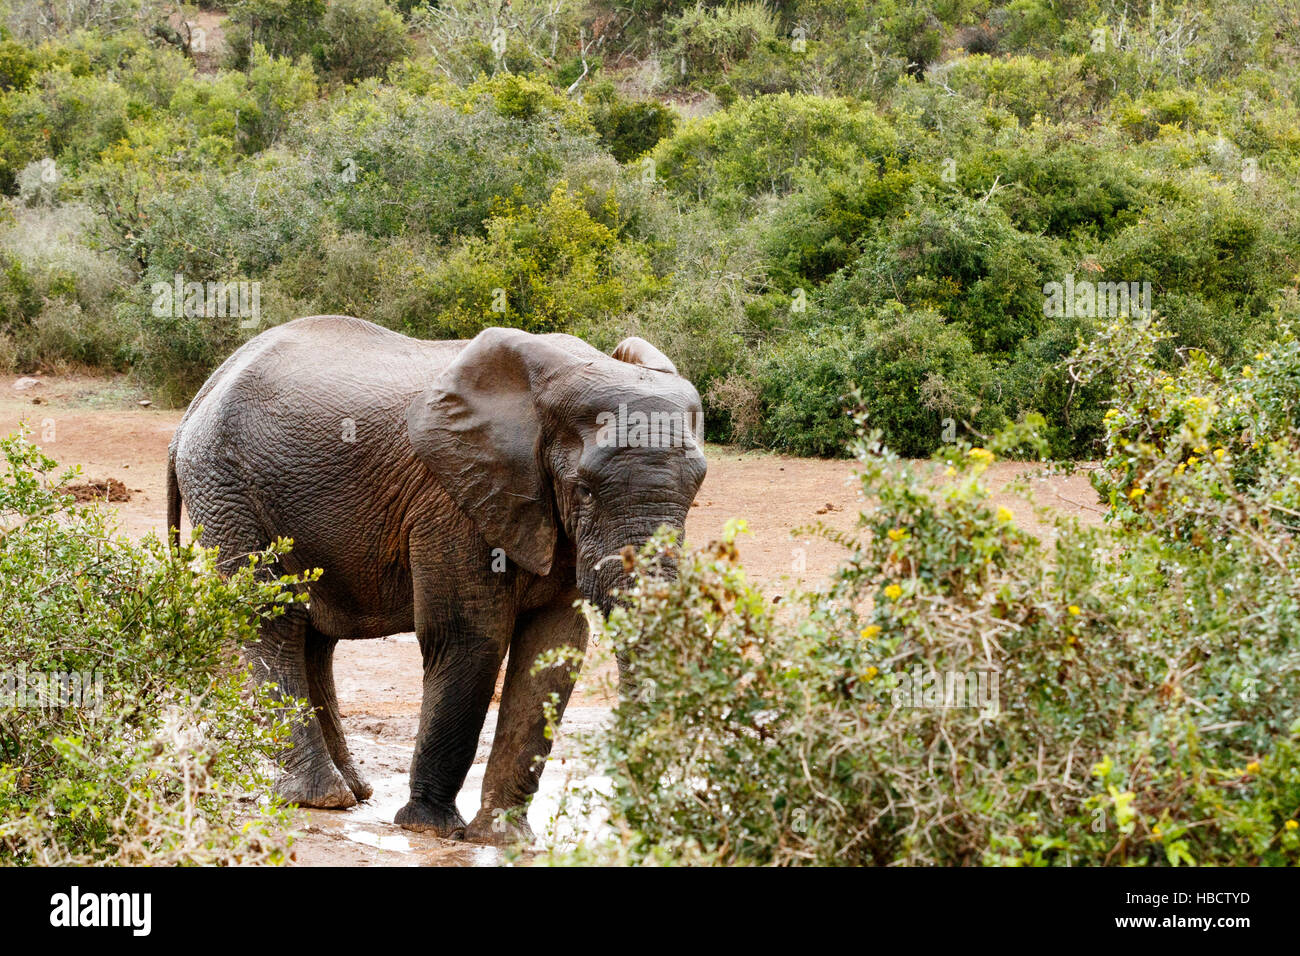 Can he still see me - African Bush Elephant Stock Photo